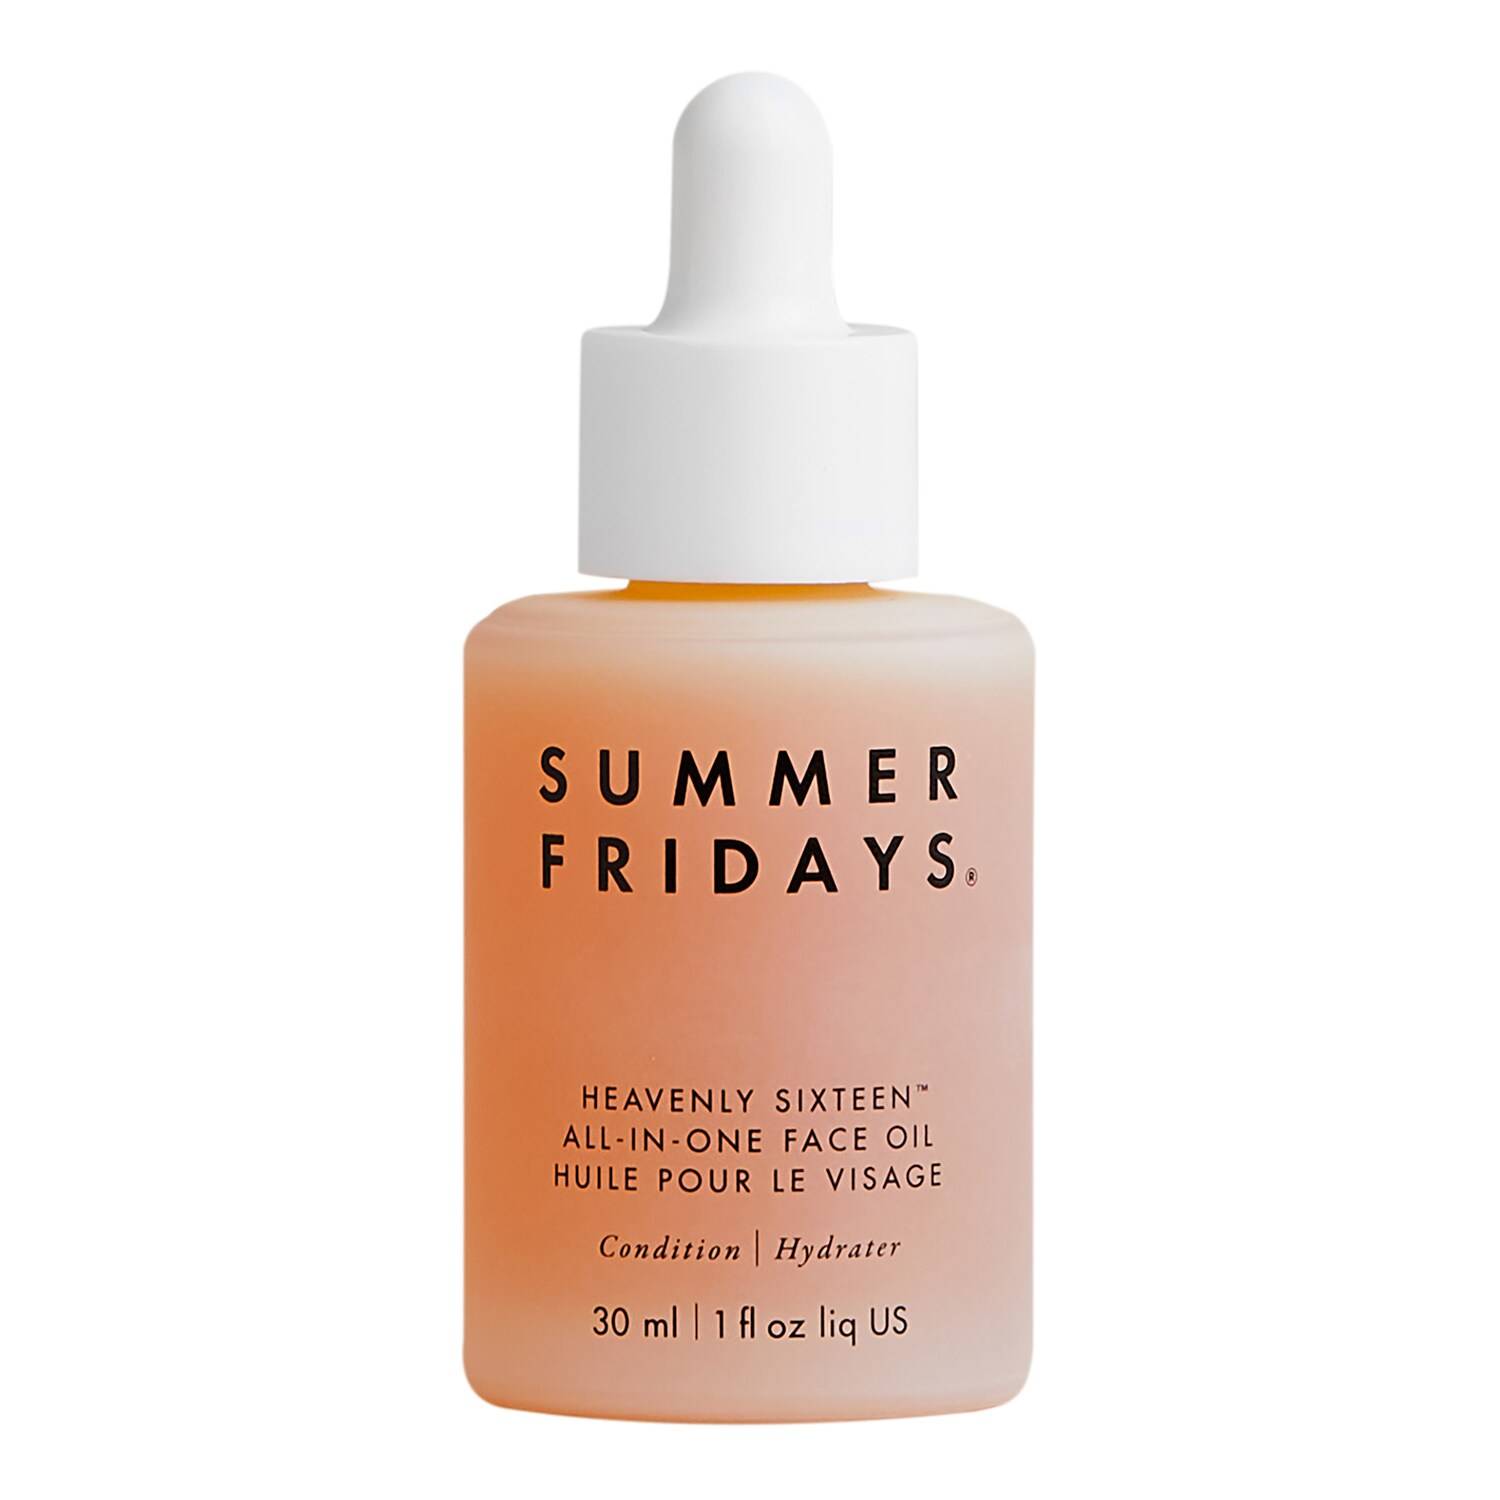 Summer Fridays Heavenly Sixteen All-In-One Face Oil 30Ml